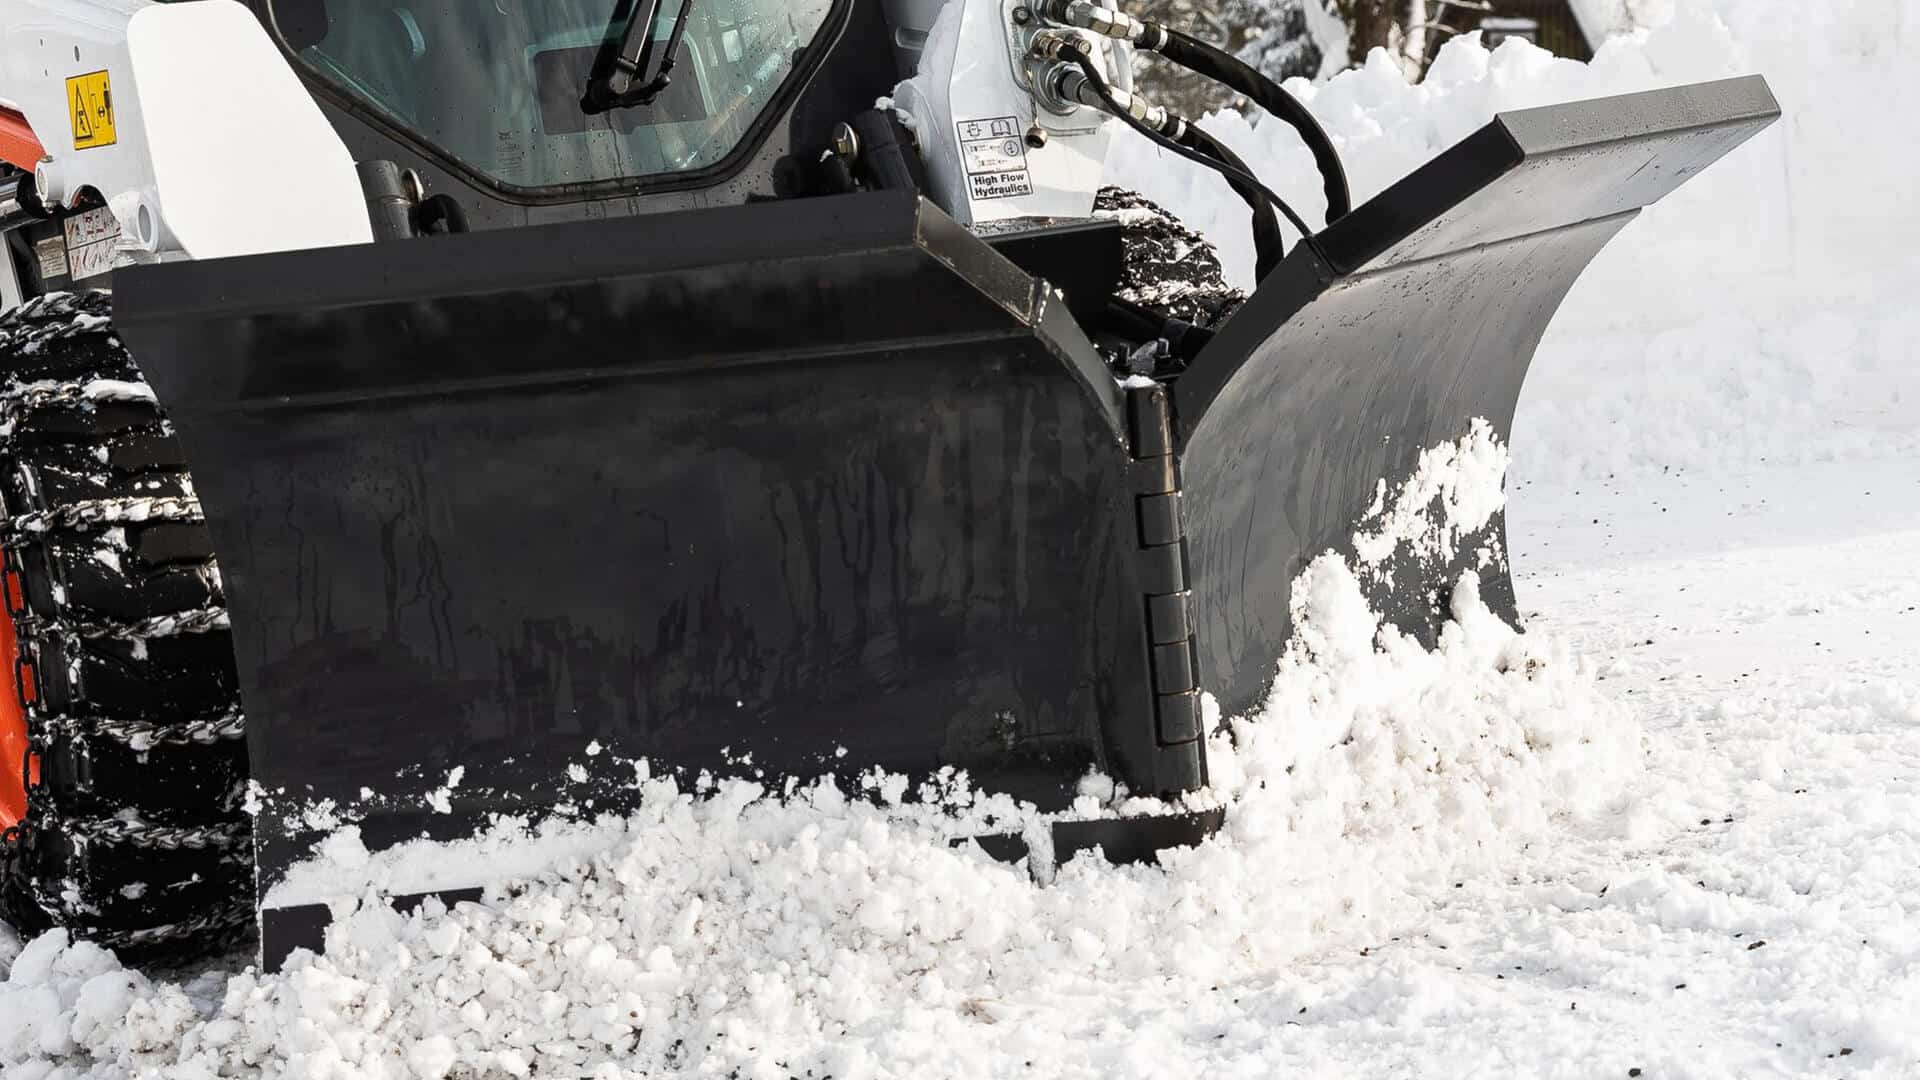 Snow V-blade, Small Articulated Loaders